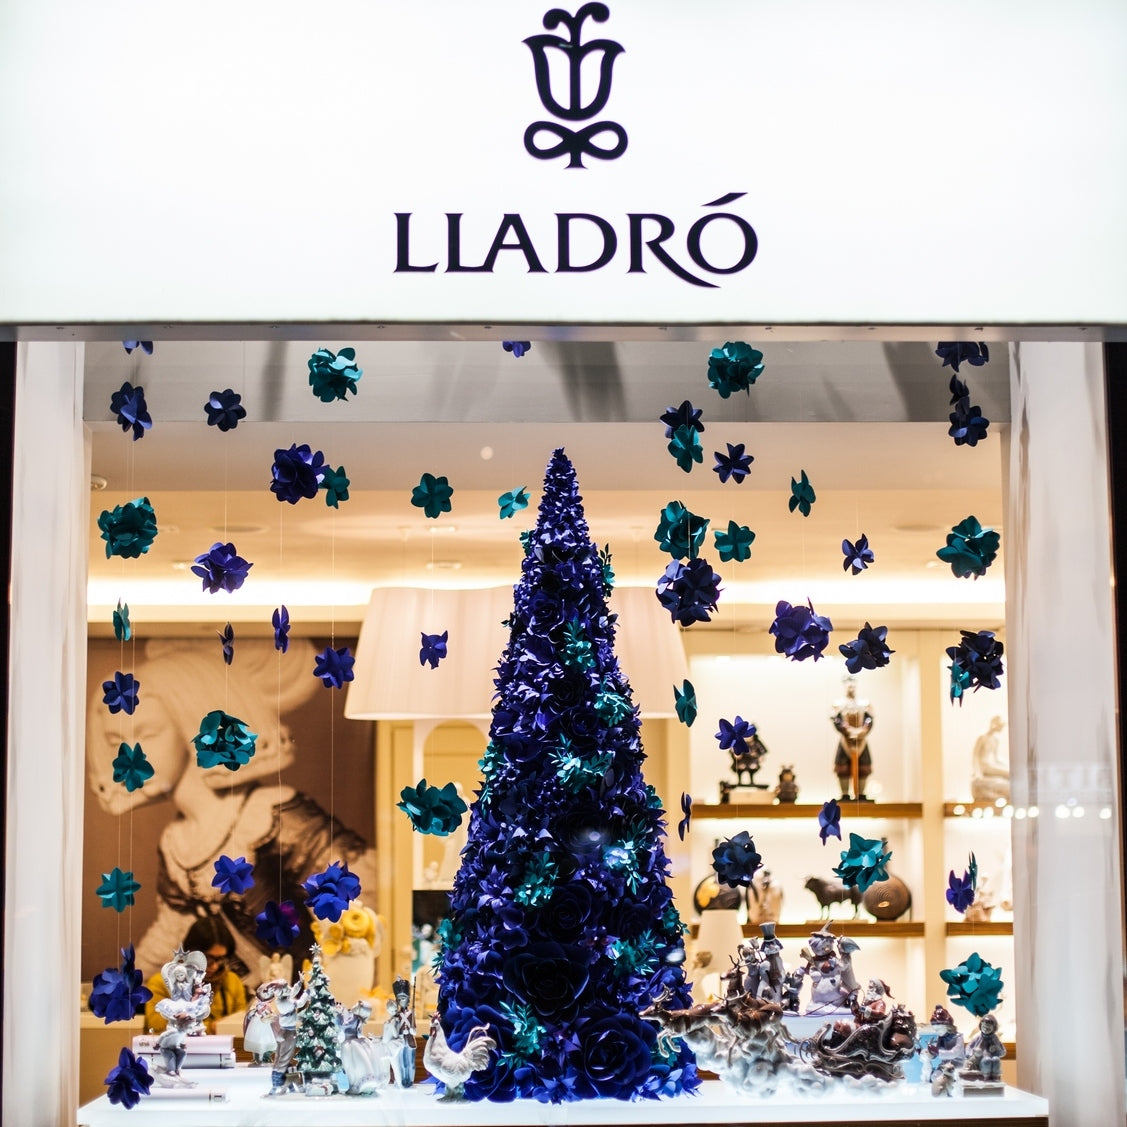 Paper flower Christmas tree in ultramarine blue and turquoise blue with hanging paper hydrangeas for Lladró winter display.